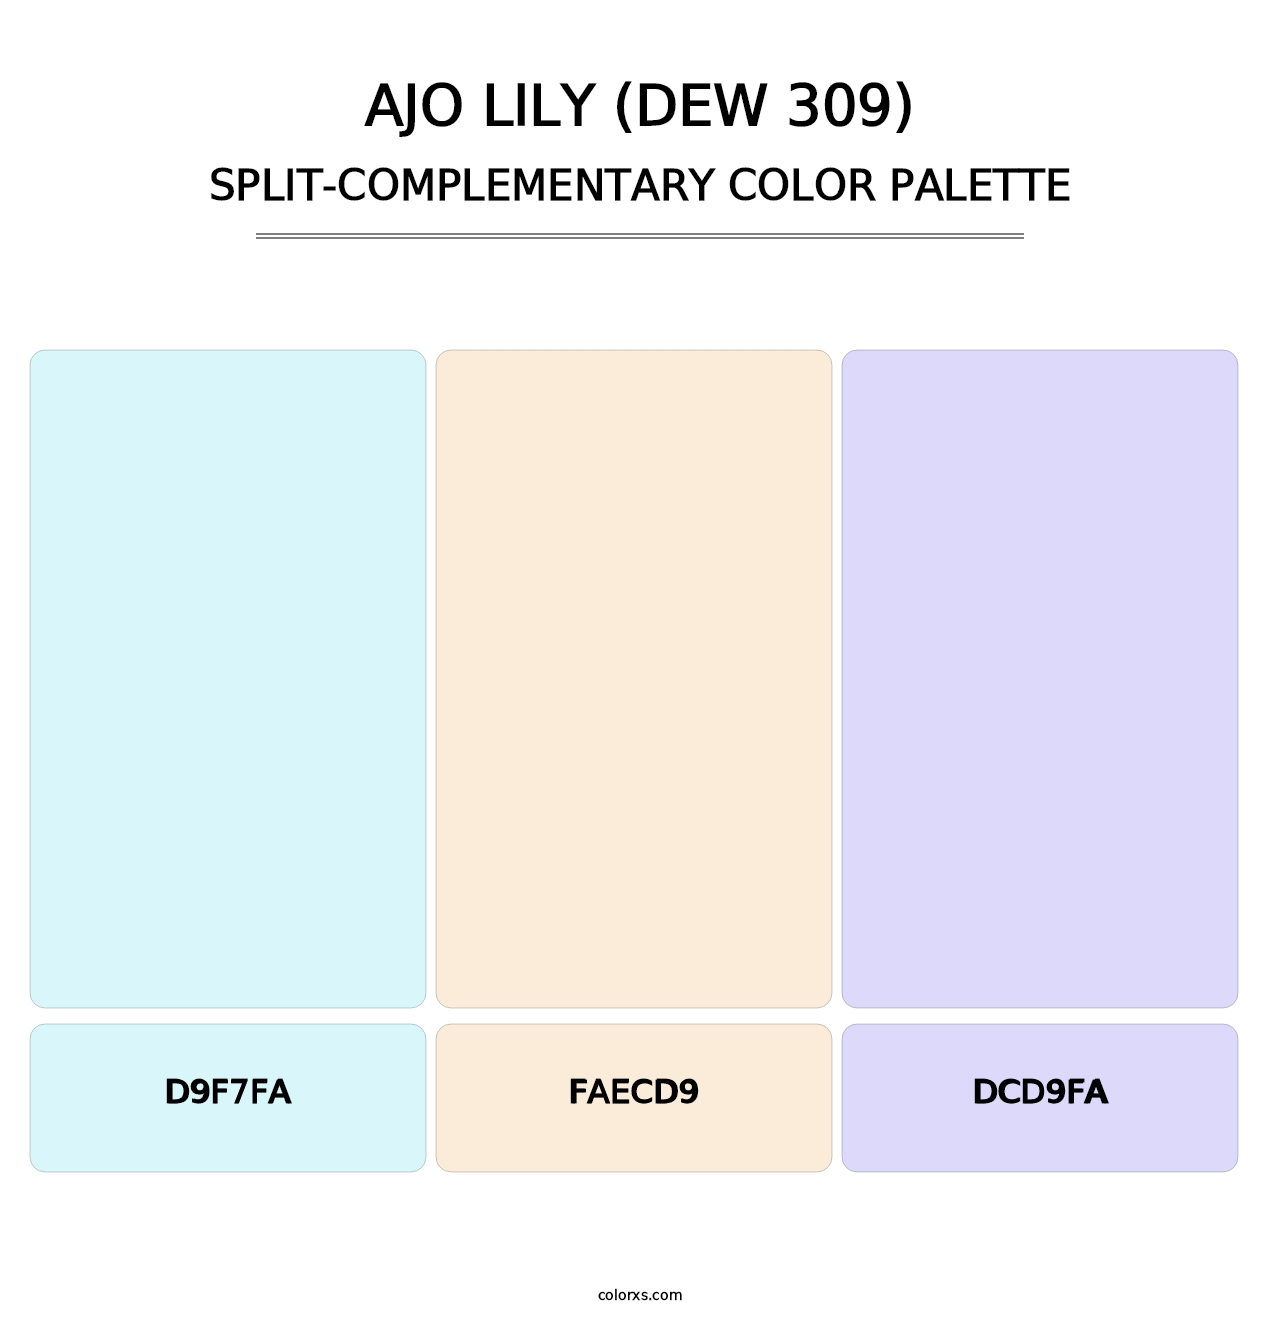 Ajo Lily (DEW 309) - Split-Complementary Color Palette